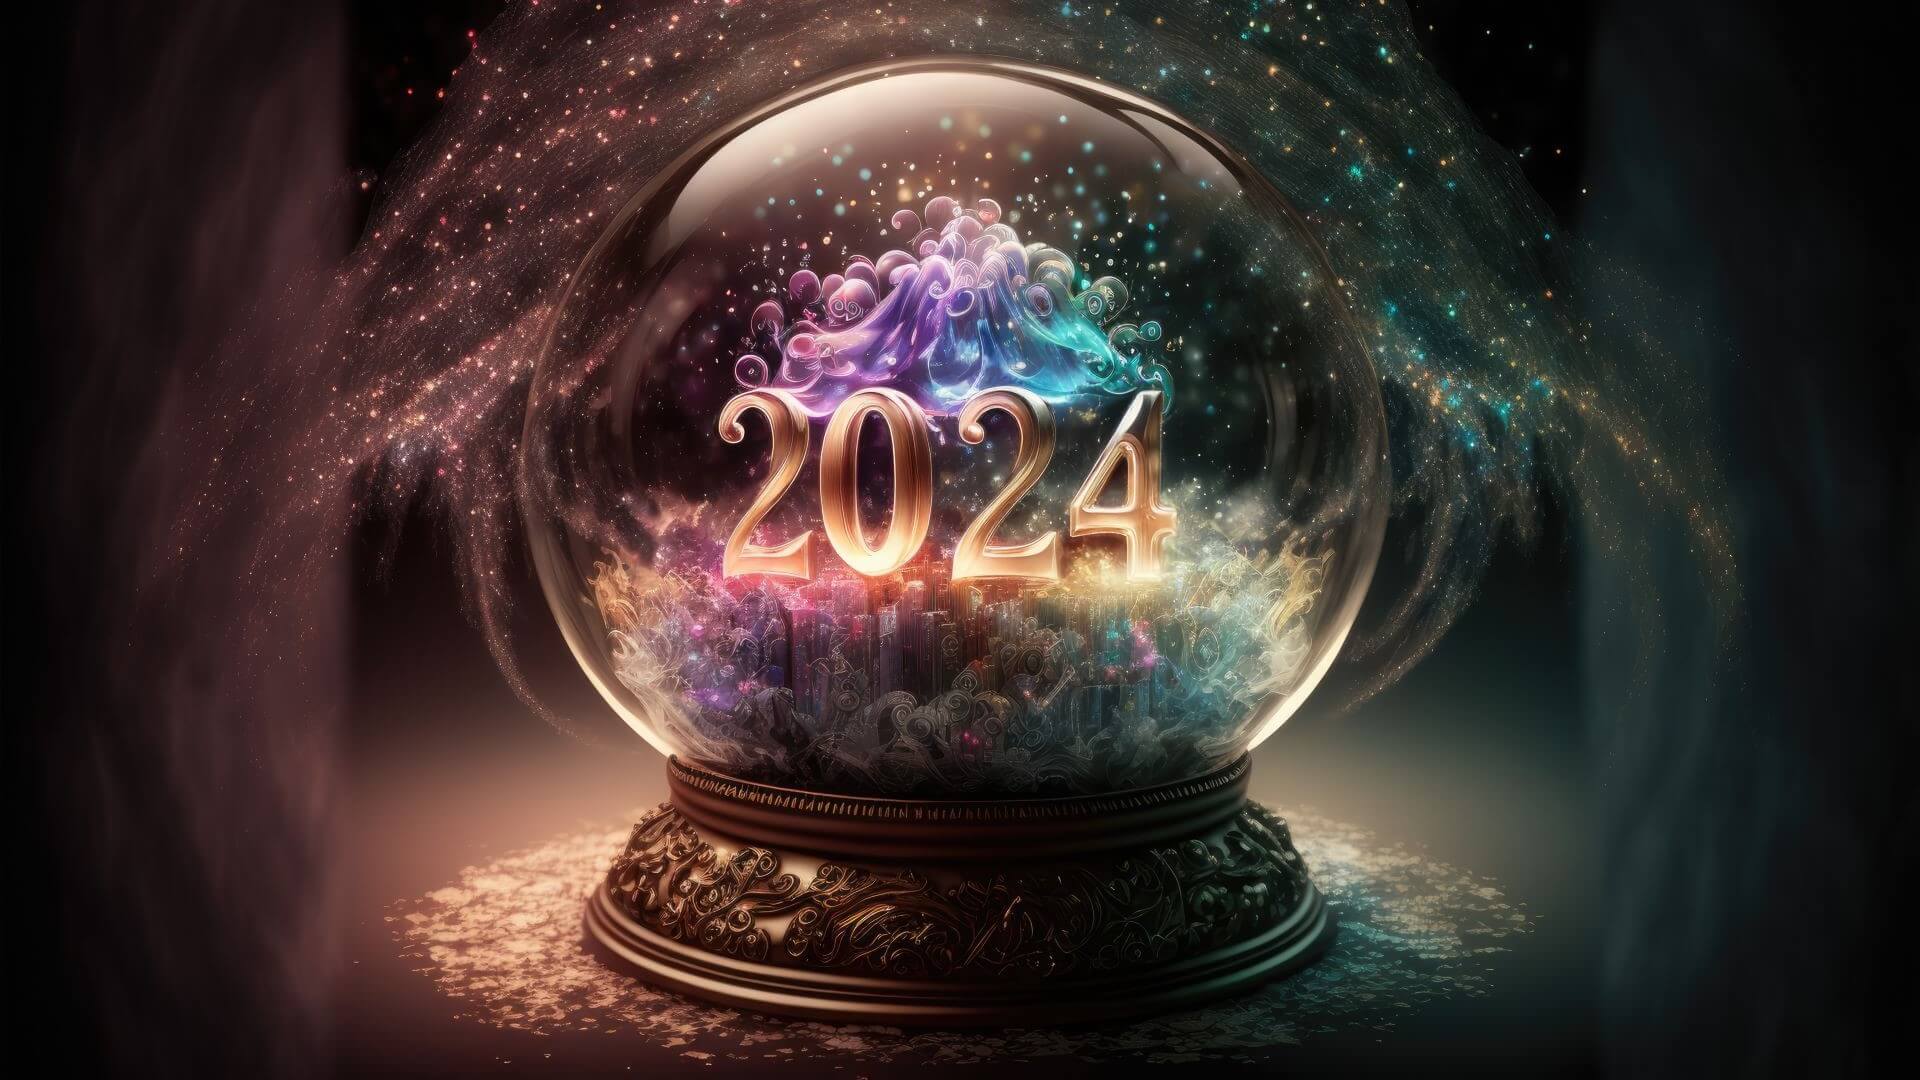 Computer generated image of a crystal ball with smoke surrounding it and the year 2024 set inside